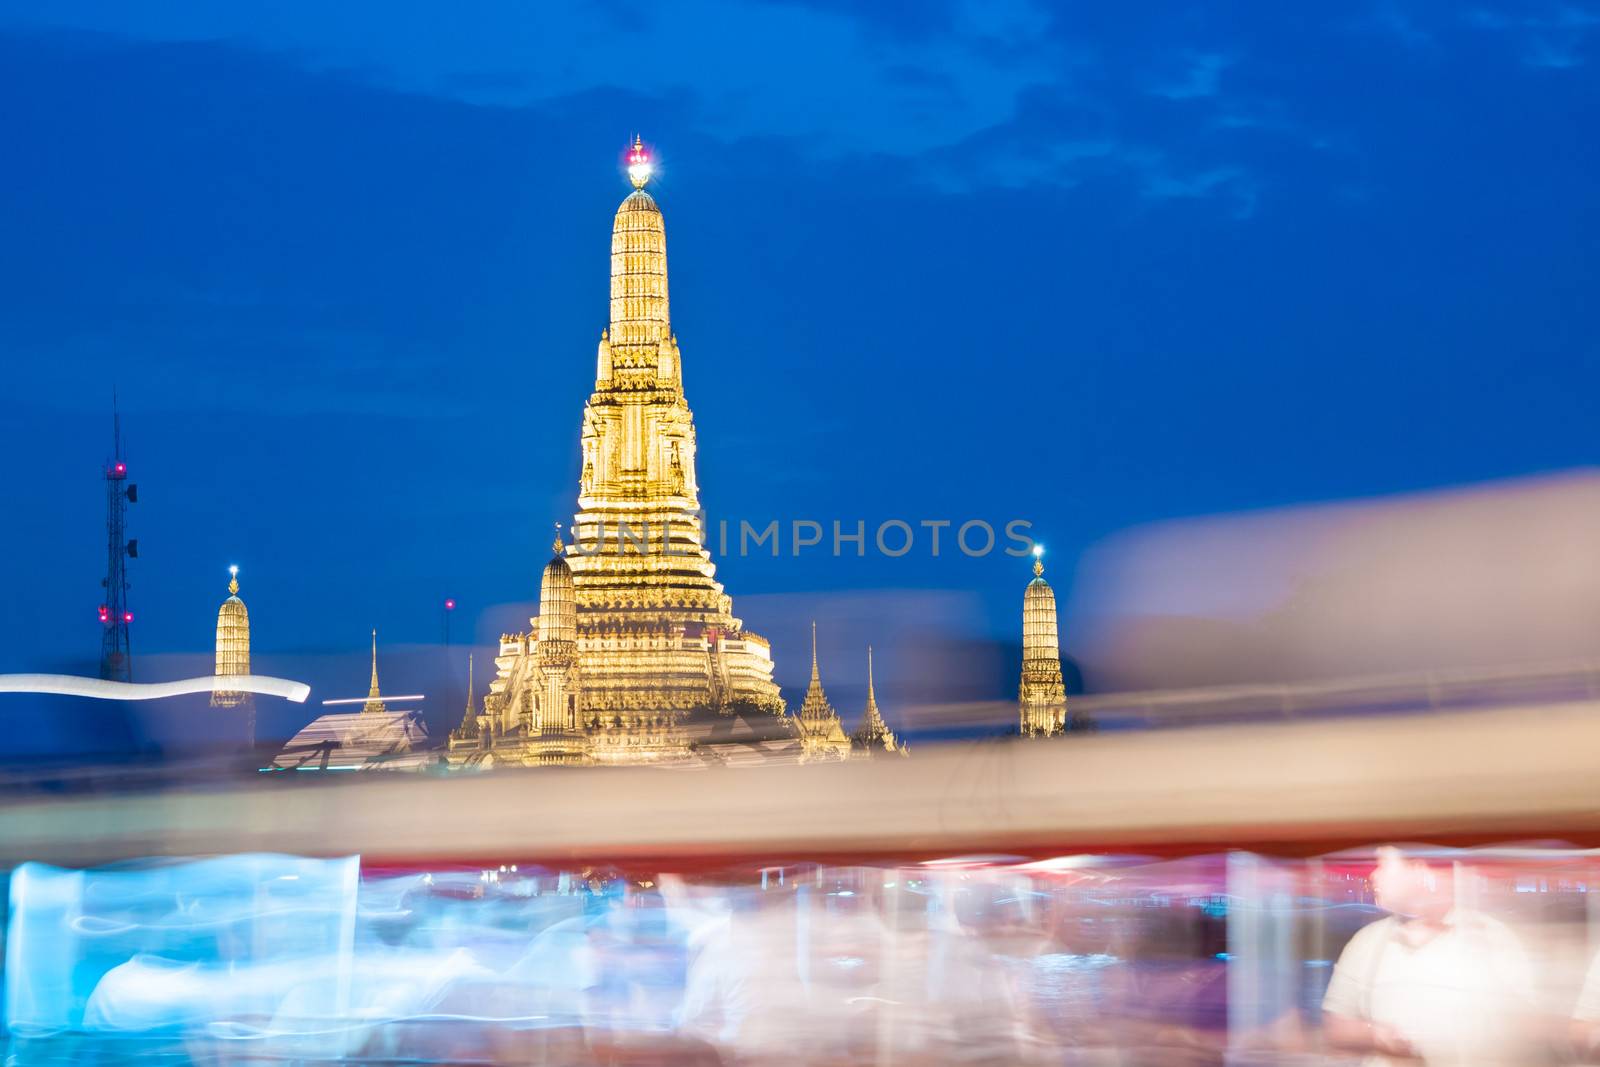 Bangkok, Thailand - Wat arun in dusk. People going from work in a publik boat on the Chao Phraya river.